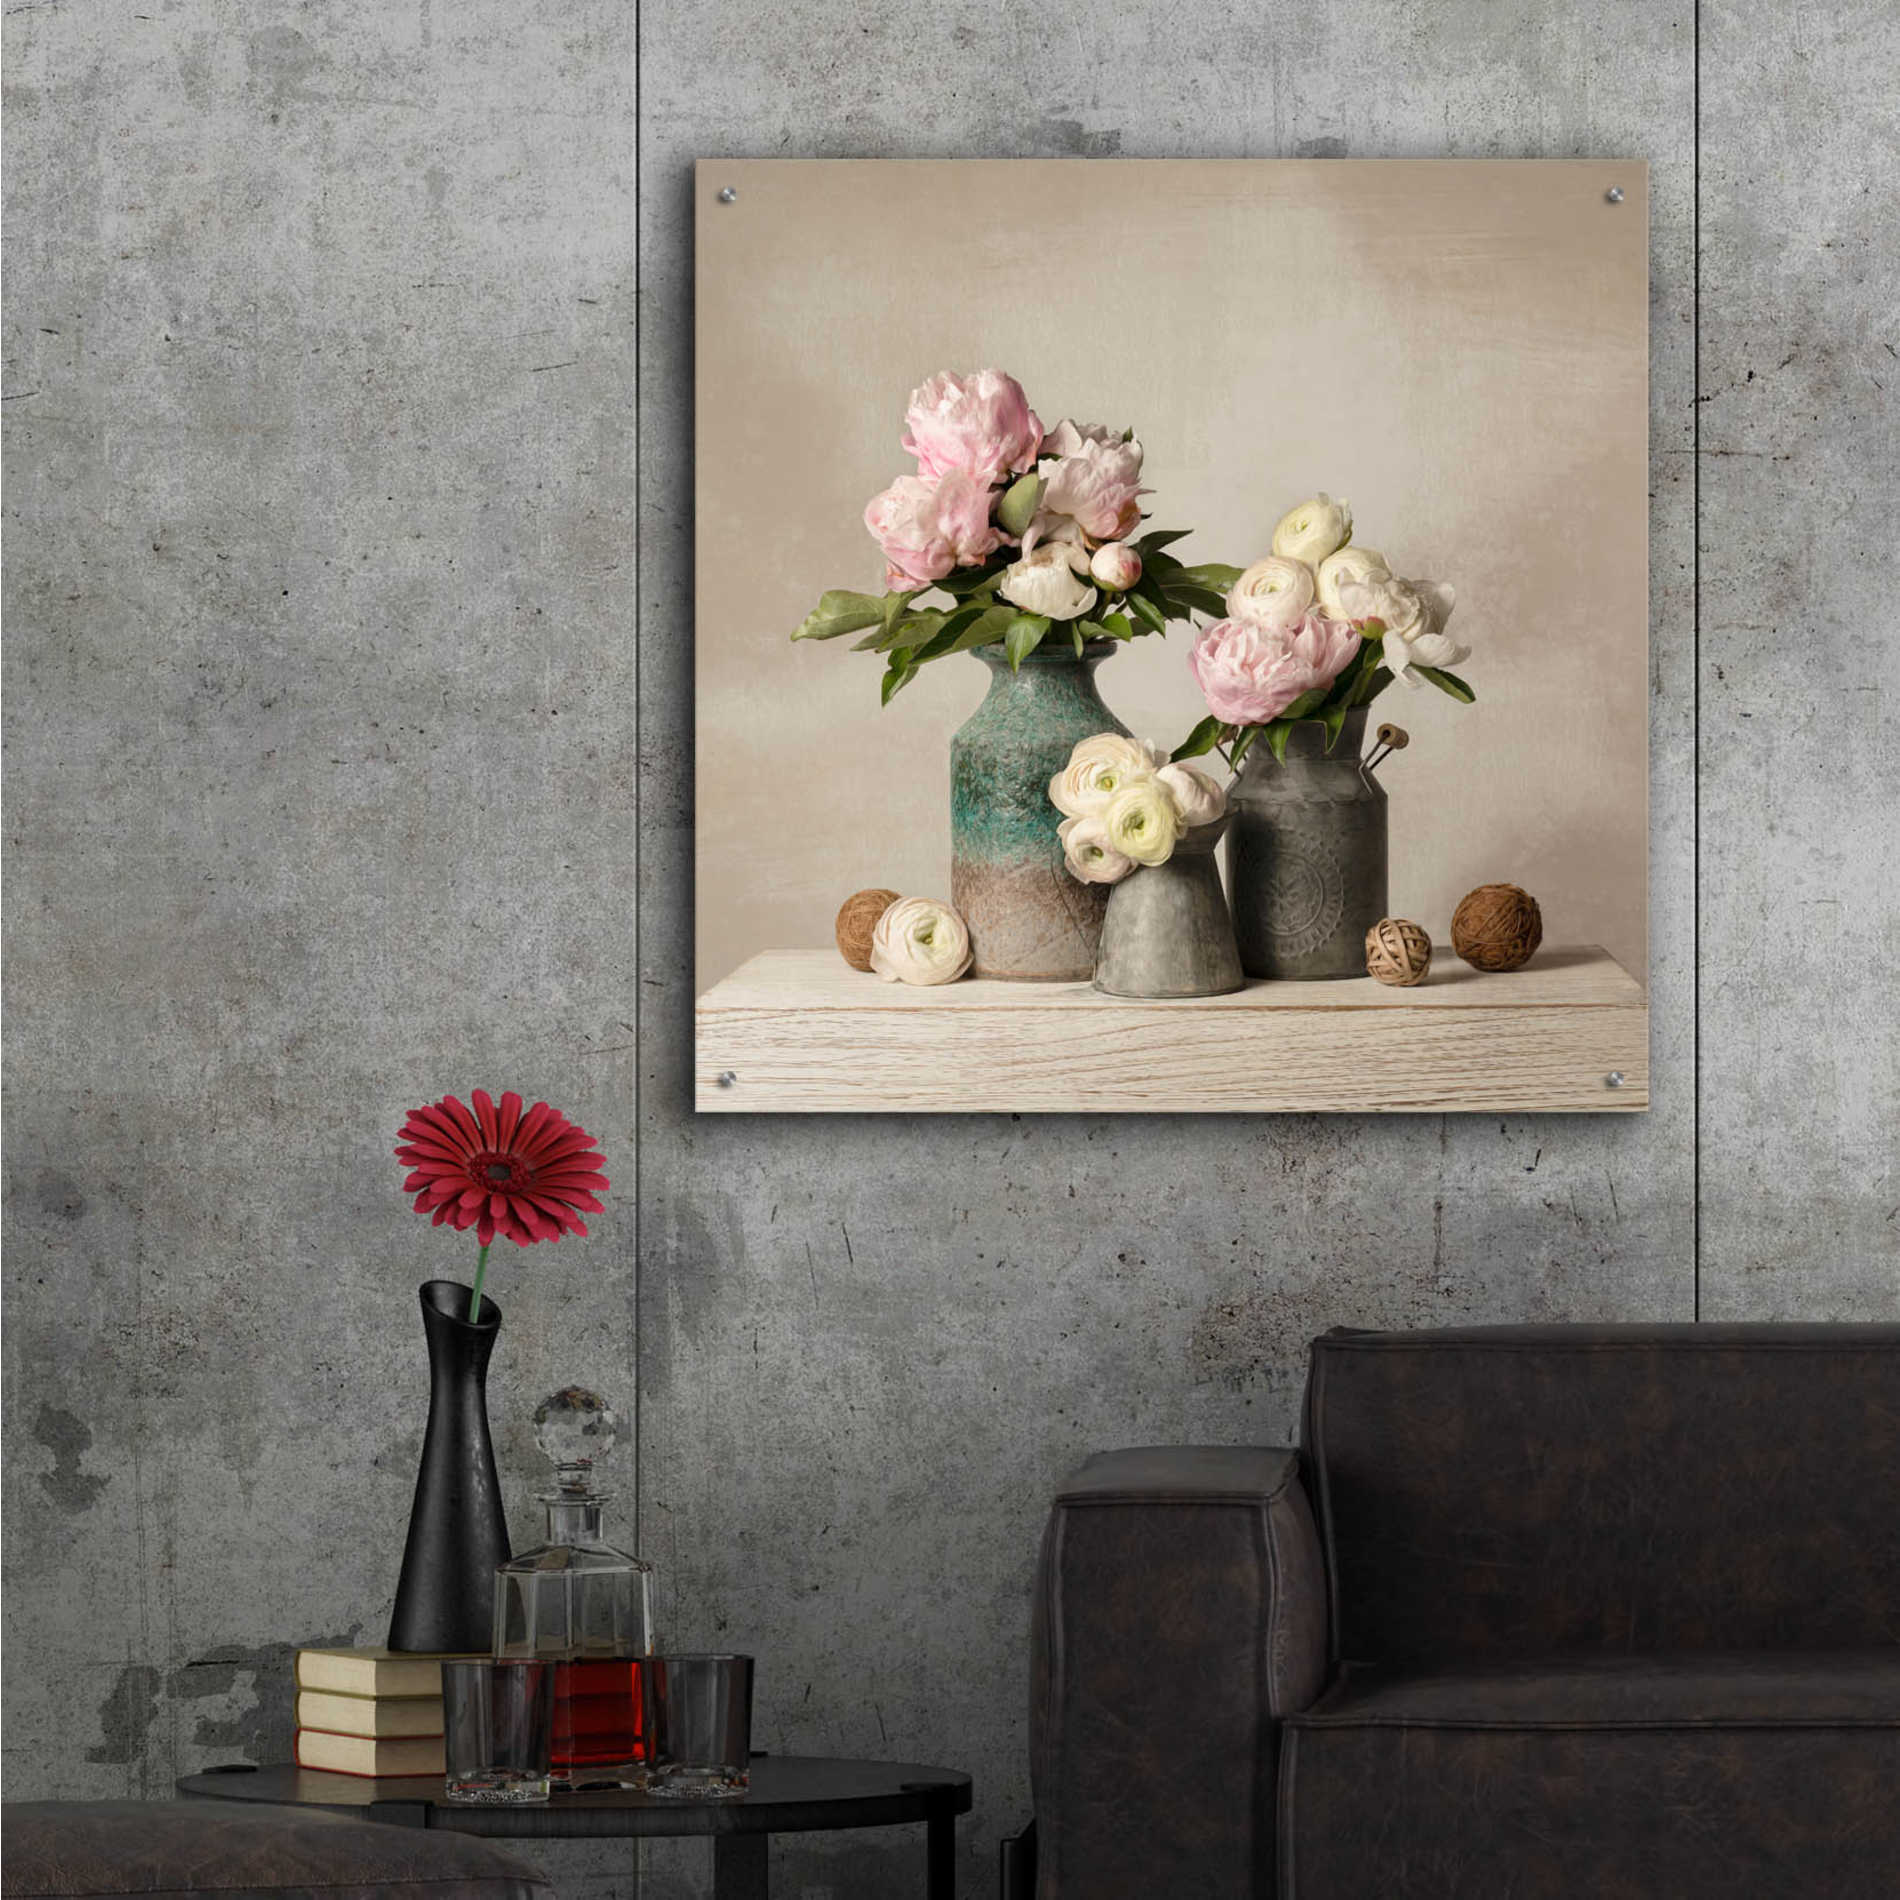 Epic Art 'Three Spring Blooms' by Leah McLean Acrylic Glass Wall Art,36x36